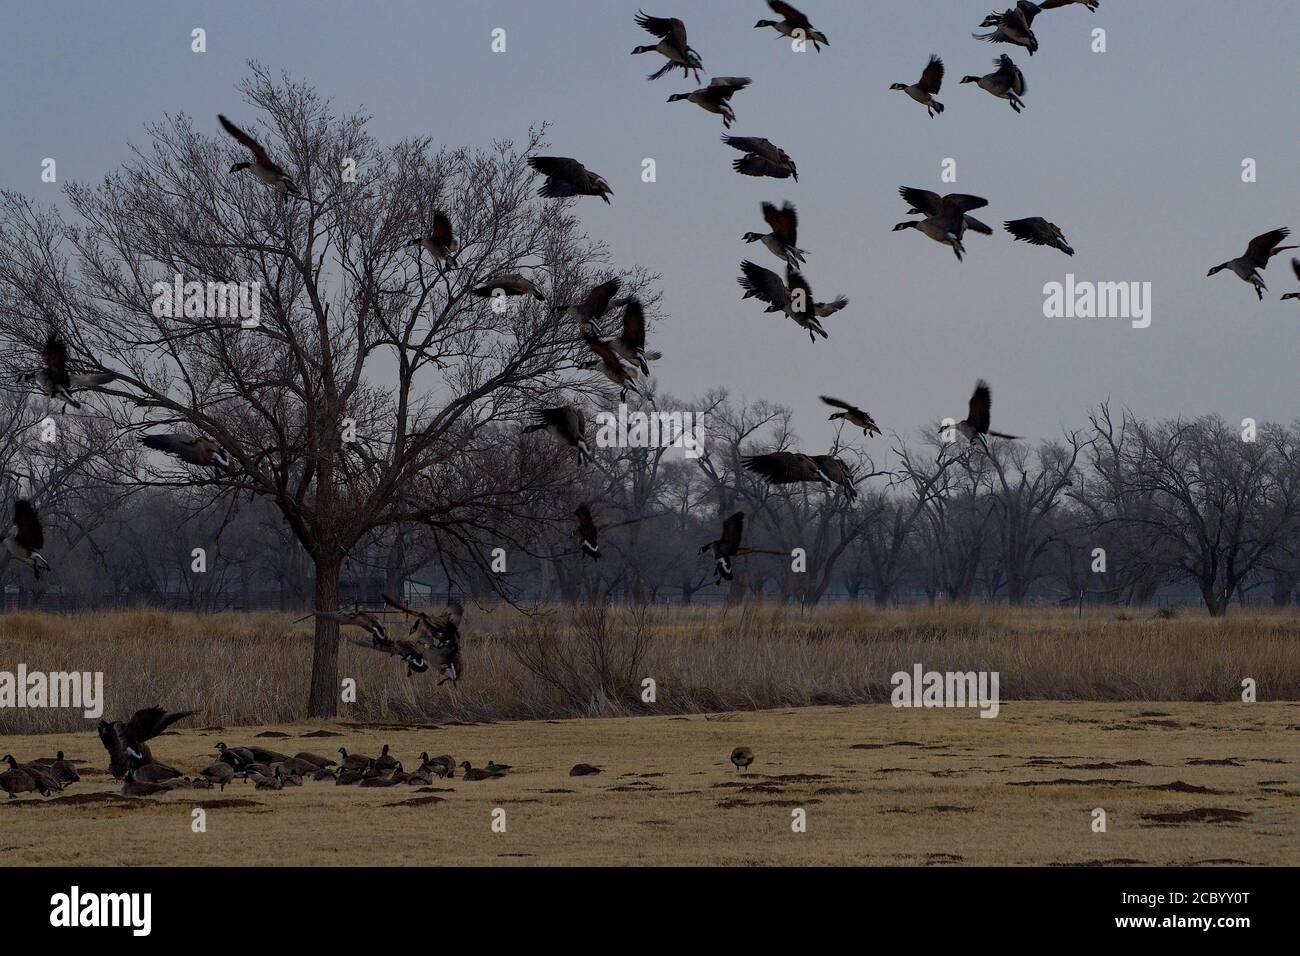 Canada geese at South East City Park Public Fishing Lake, Canyon, Texas. Stock Photo